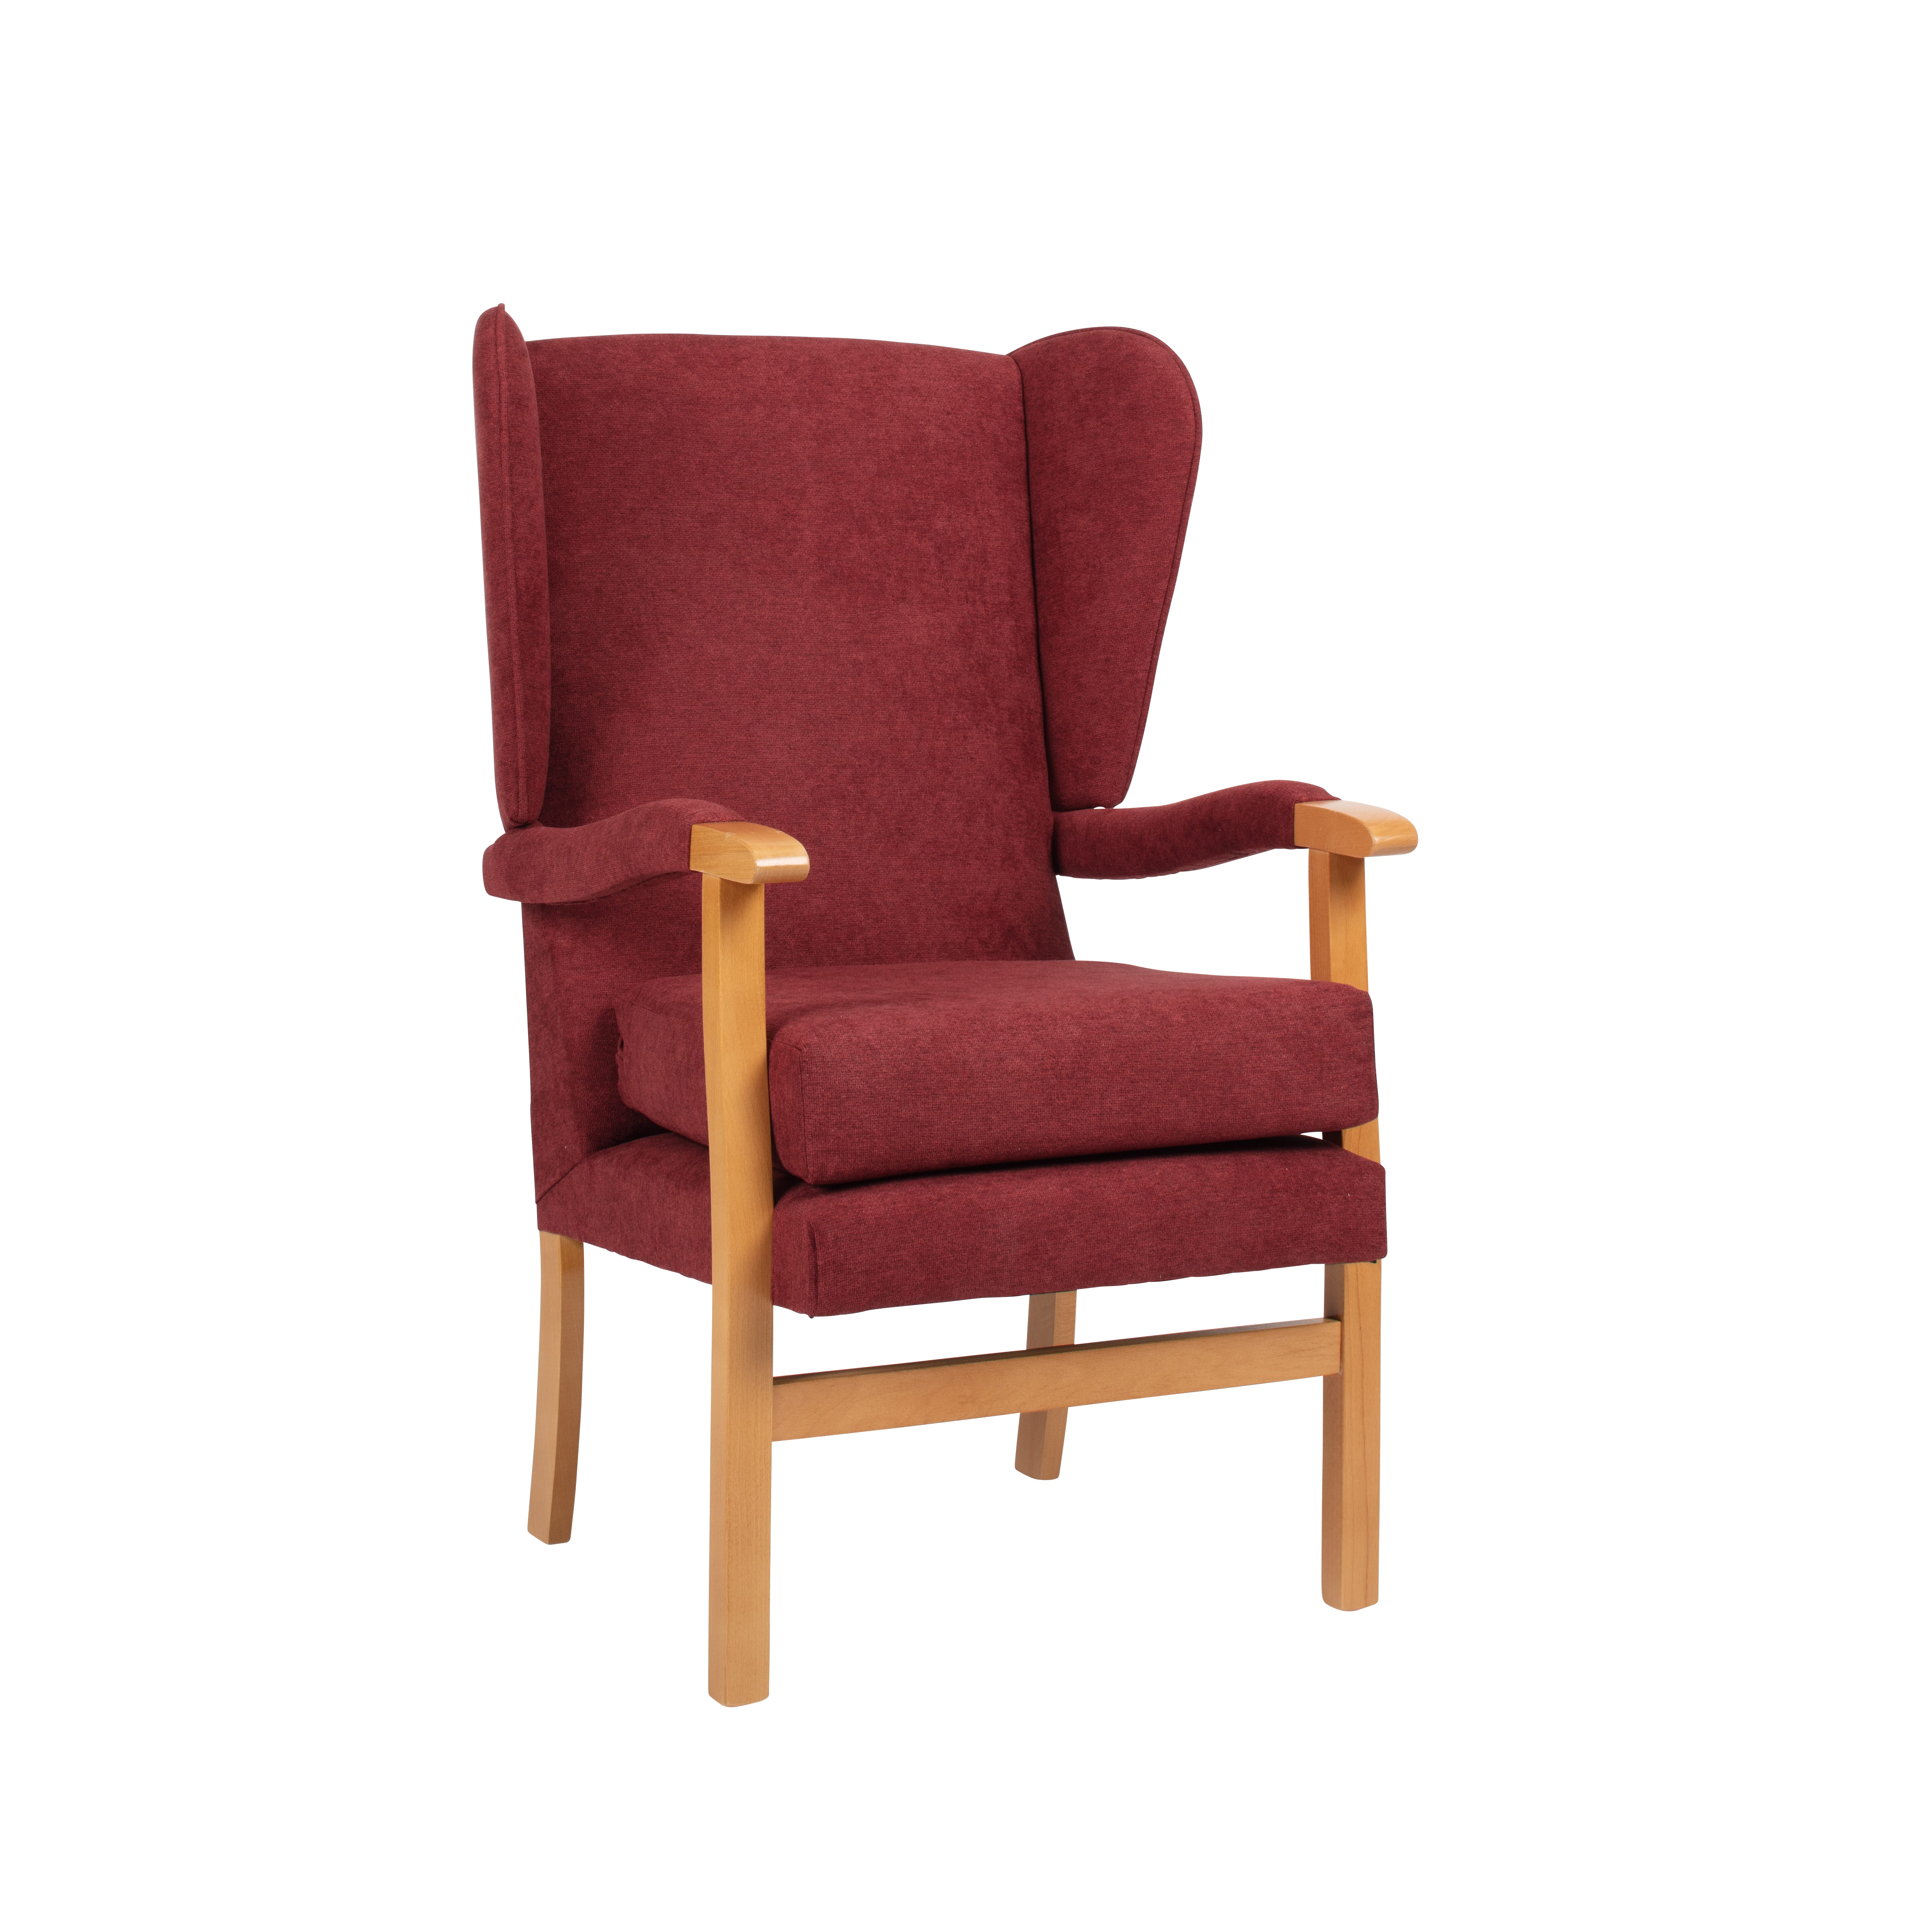 Comfortable chair with a high back, for seniors